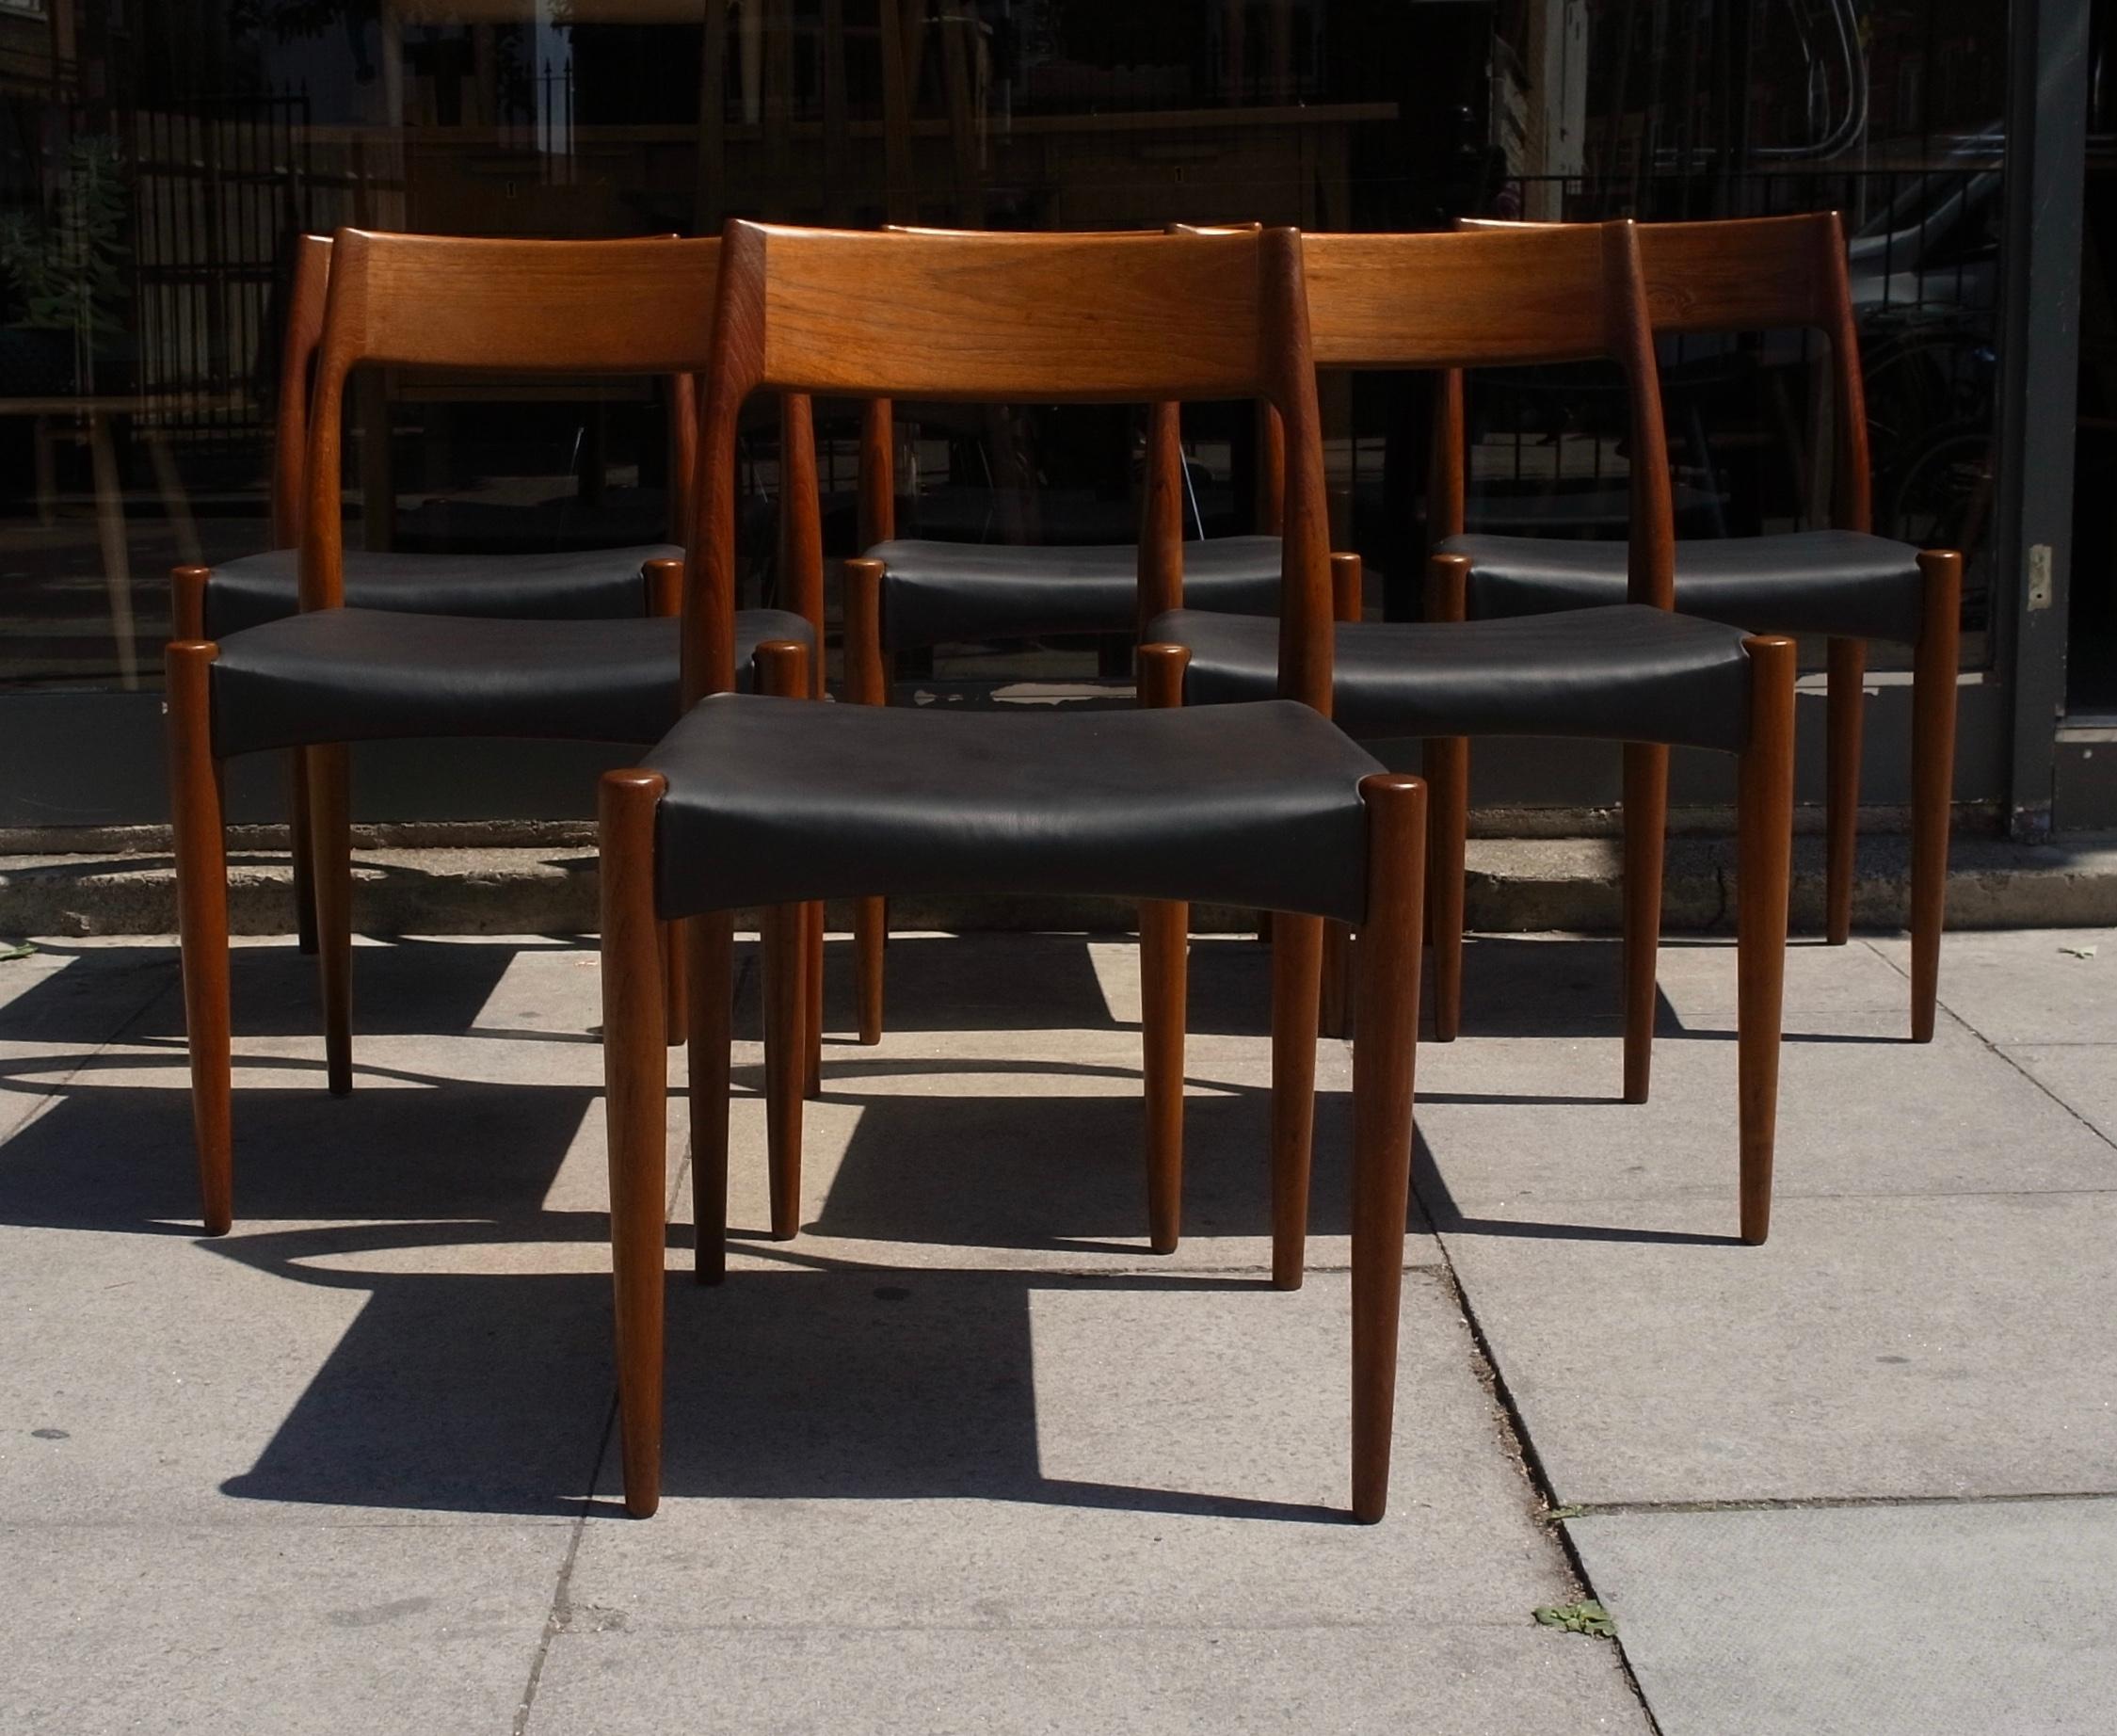 A rare and elegant 1960s set of six Danish teak model 175 dining chairs designed by Arne Hovmand-Olsen for Mogens Kold.

These sculptural dining chairs have been newly upholstered in black quality leather, and are in very good vintage condition